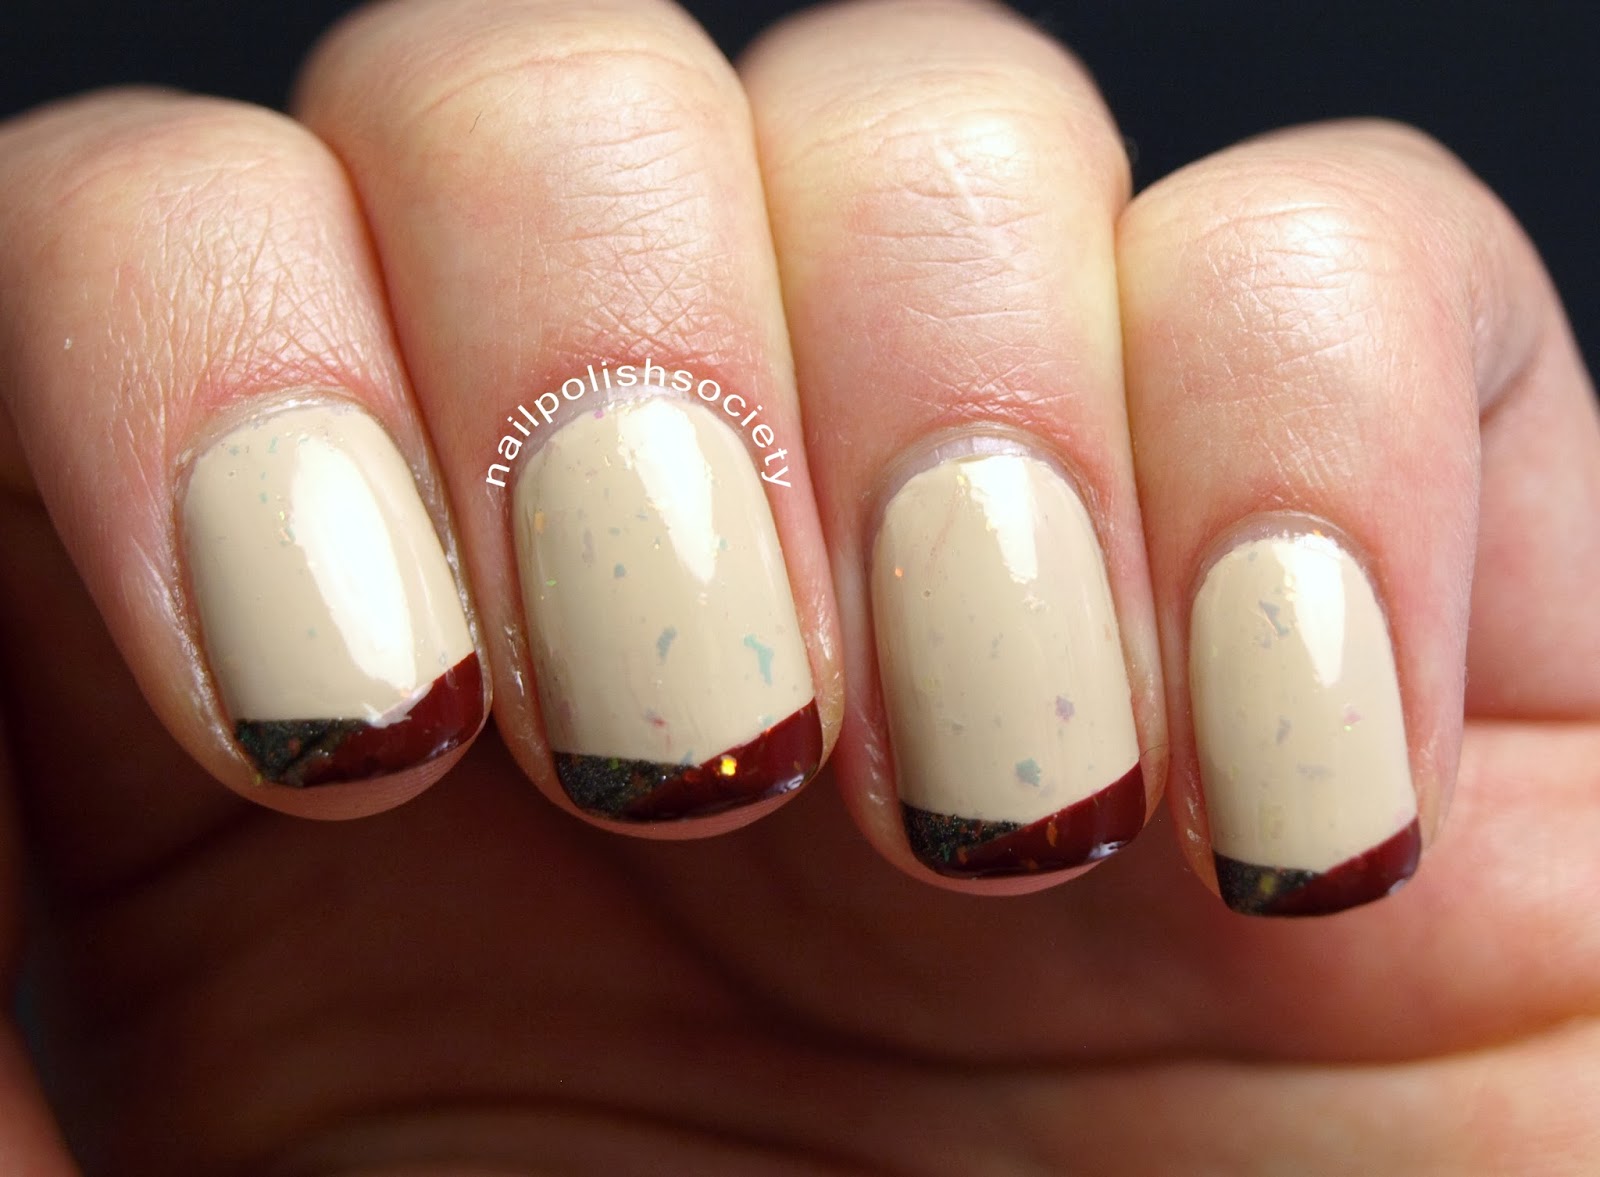 2. Muted Nail Tips - wide 3